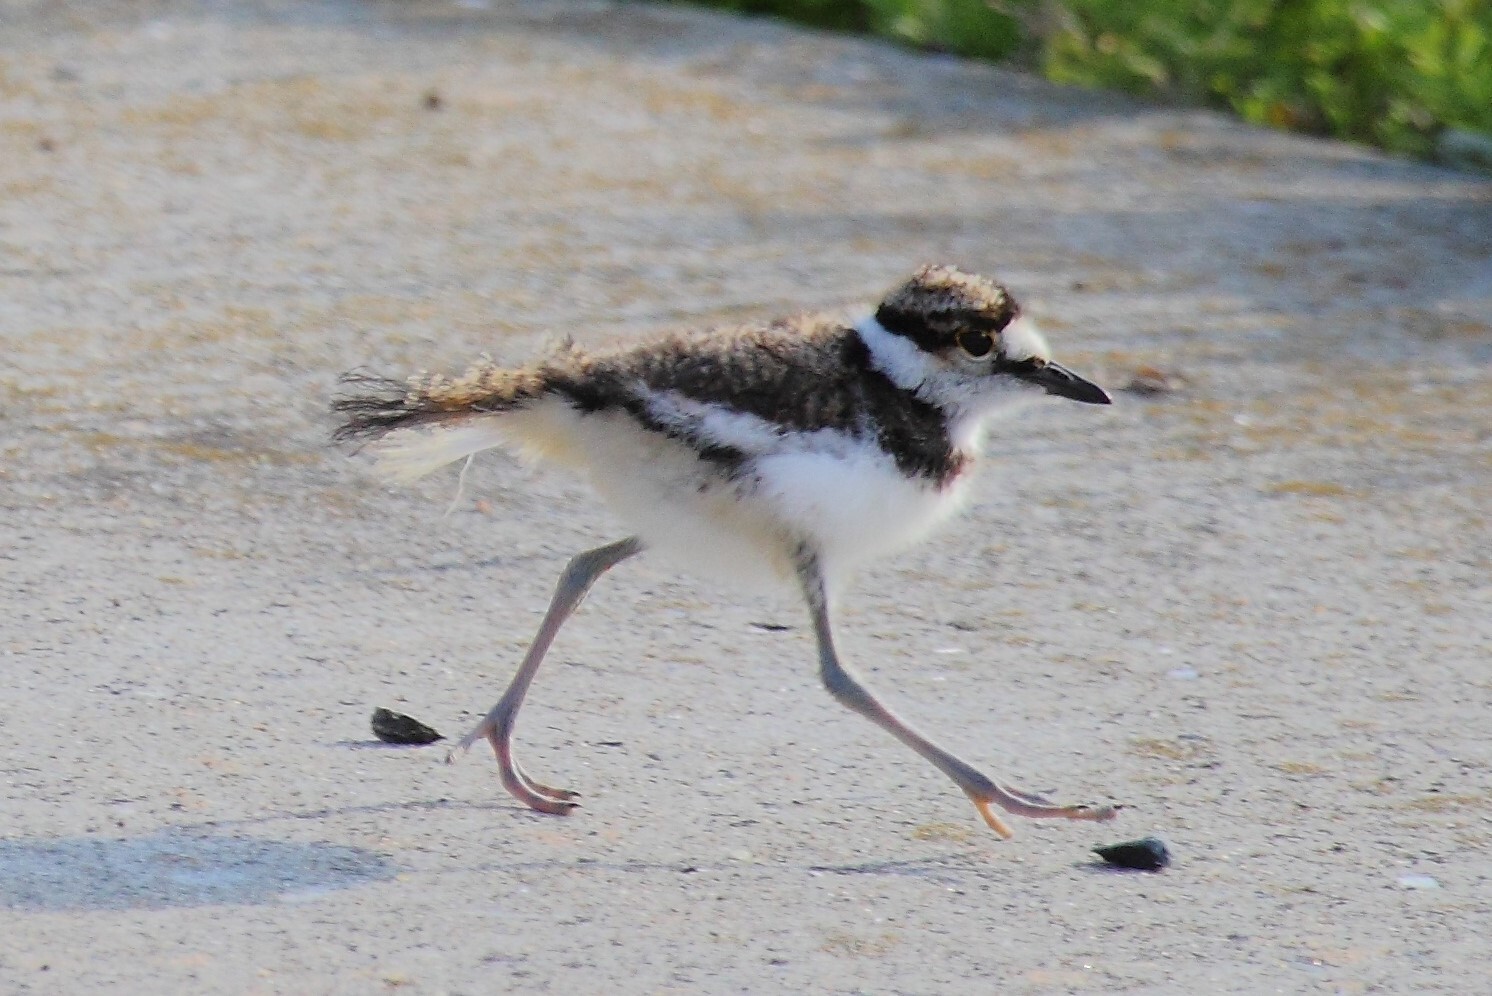 On your way in to Great Kills Park during the warmer months, look for Killdeer and their young. Photo: <a href="https://www.flickr.com/photos/51819896@N04/" target="_blank">Lawrence Pugliares</a>